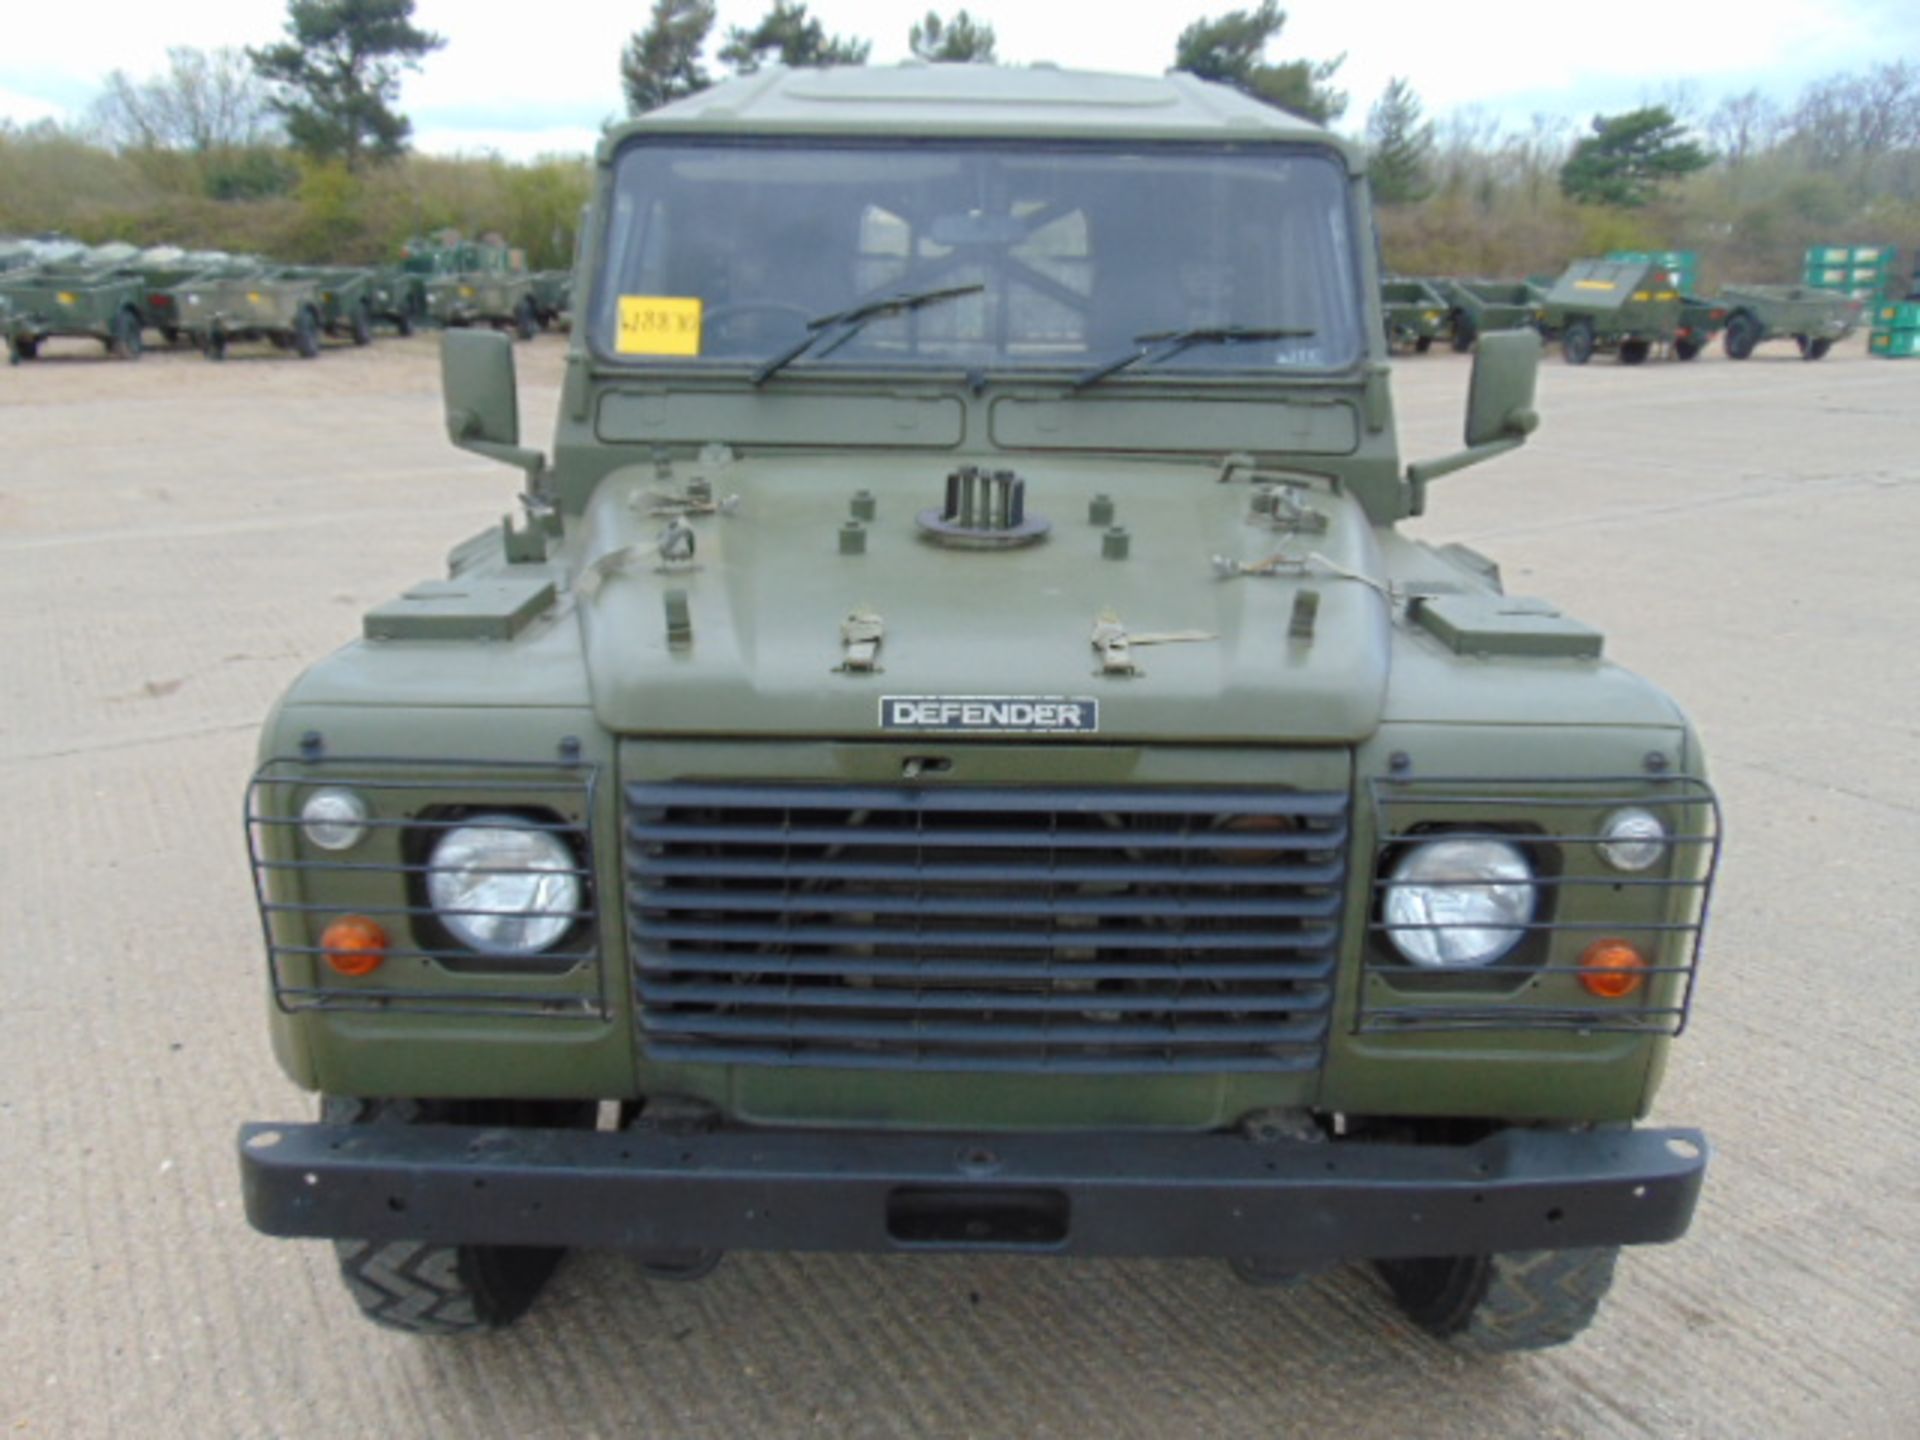 Military Specification Land Rover Wolf 90 Hard Top - Image 2 of 22